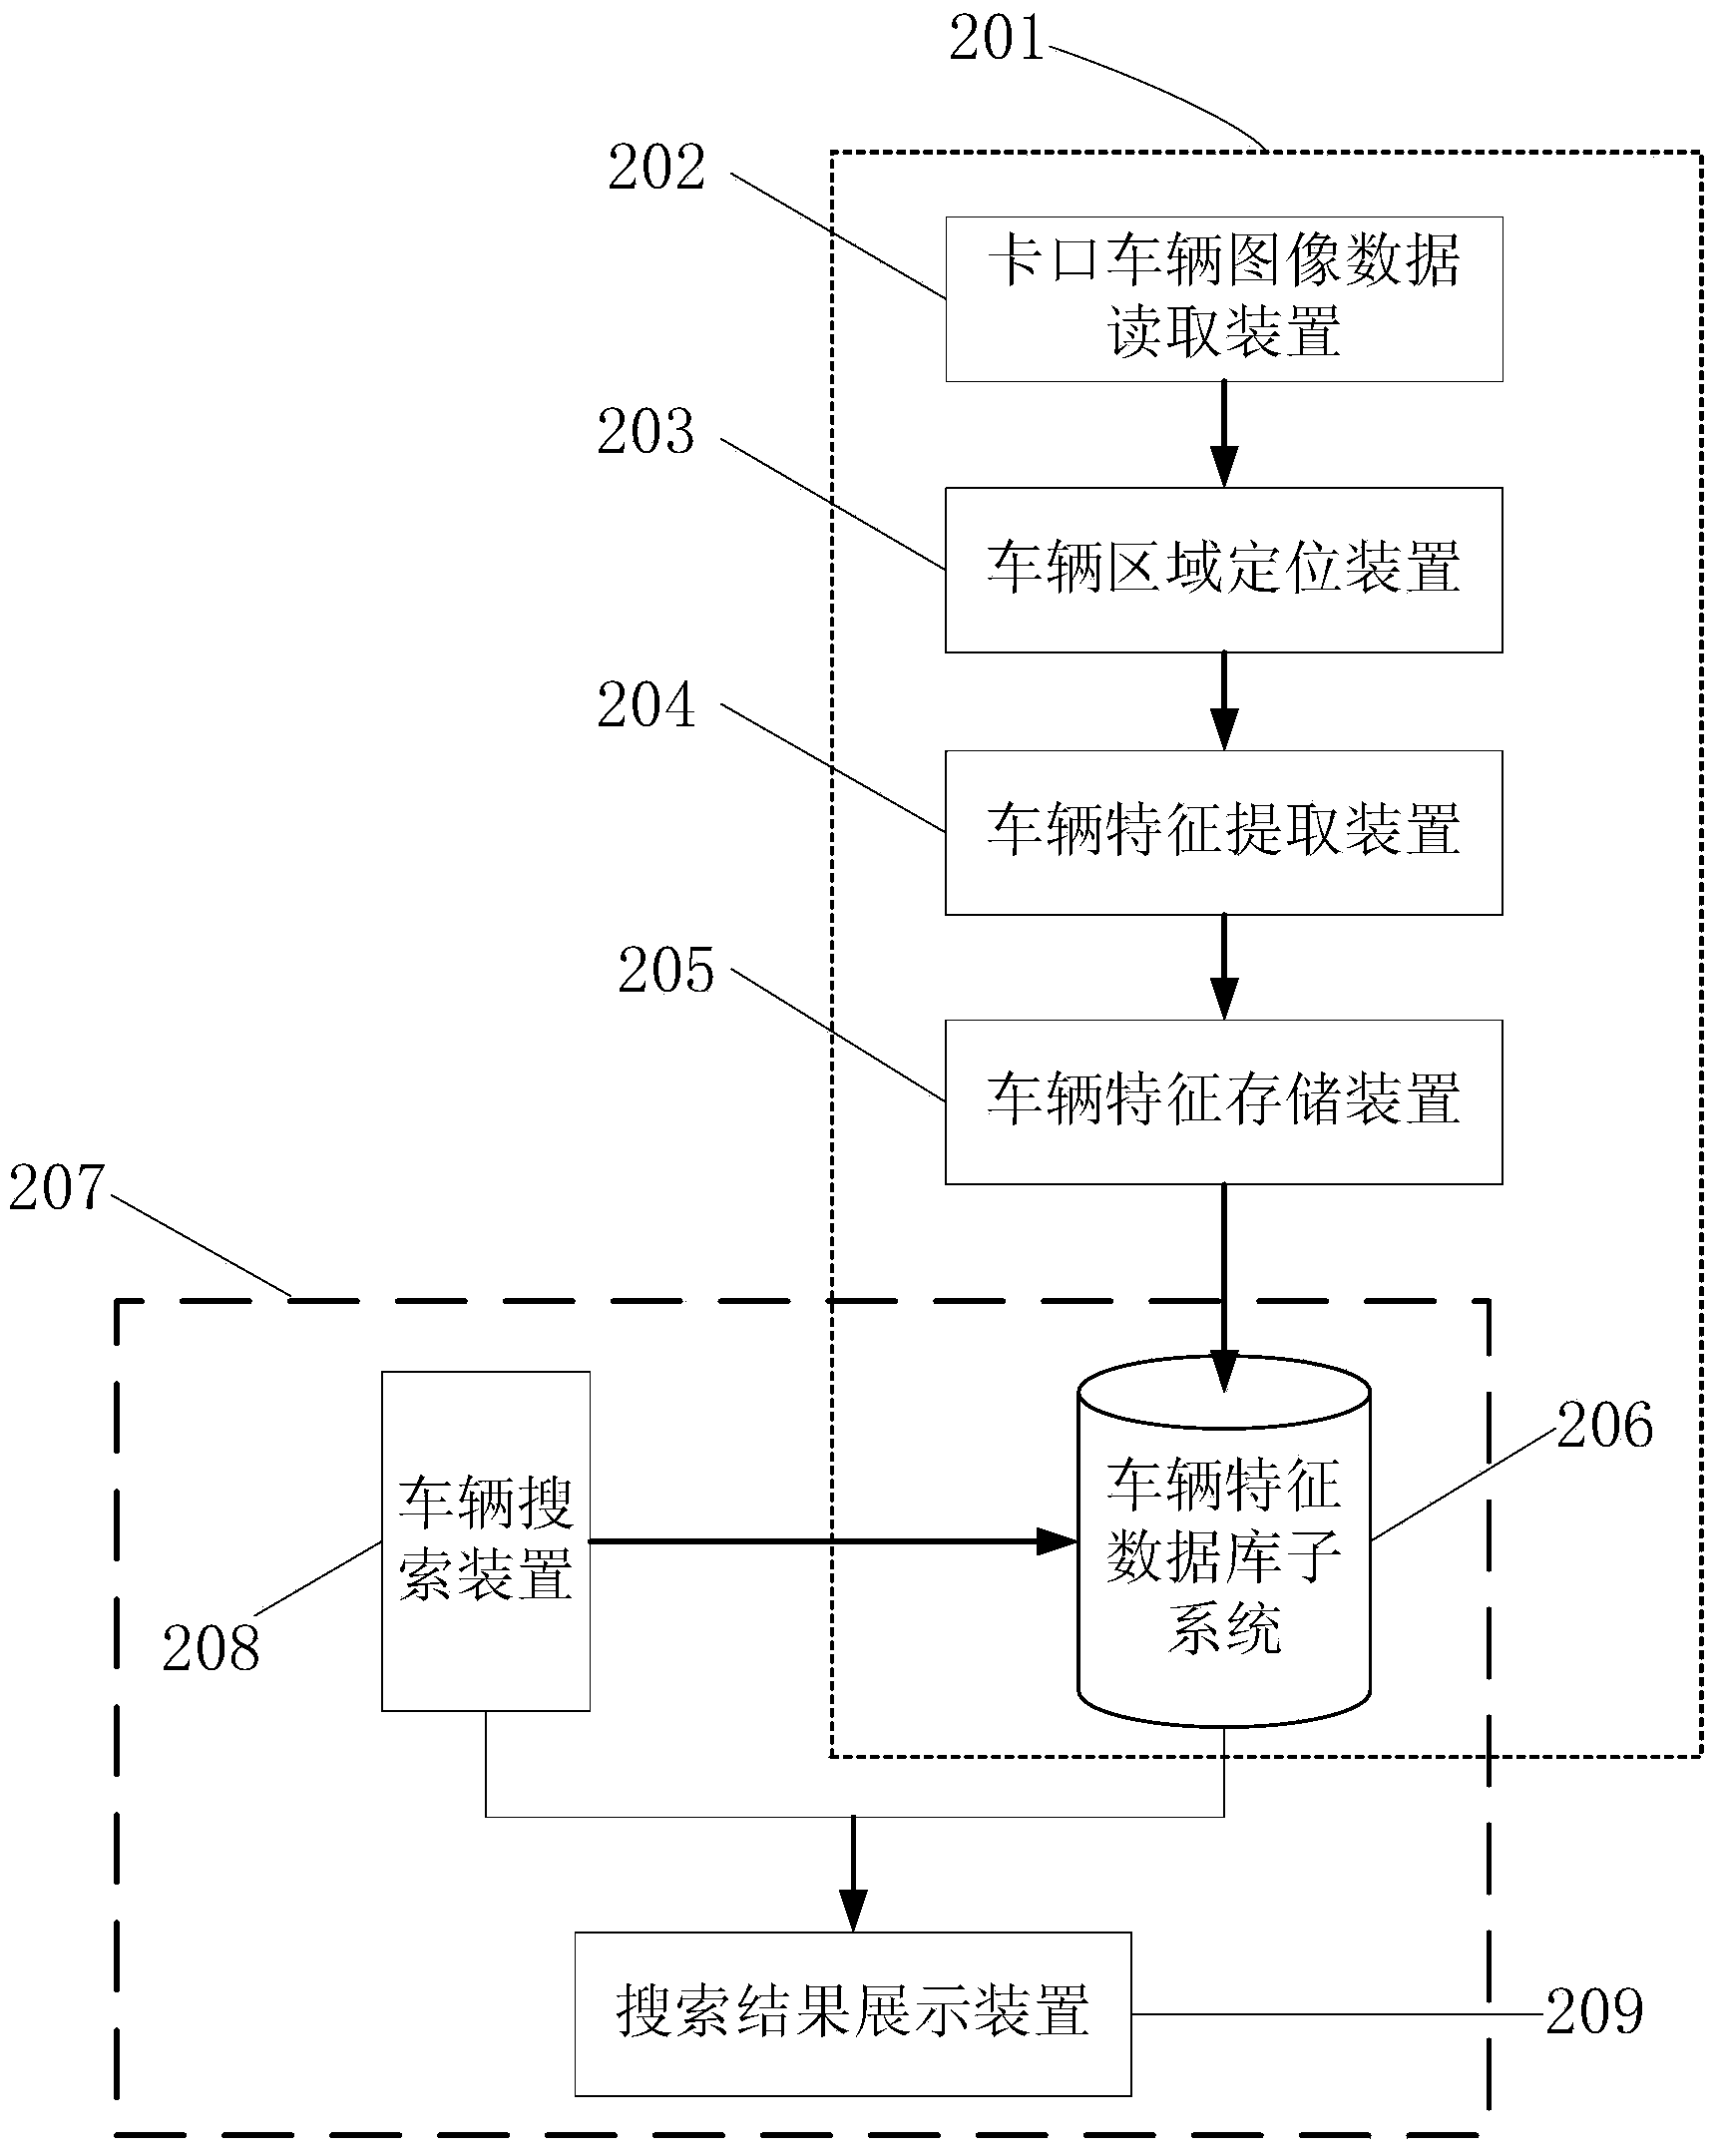 Vehicle searching method and system based on user-defined features